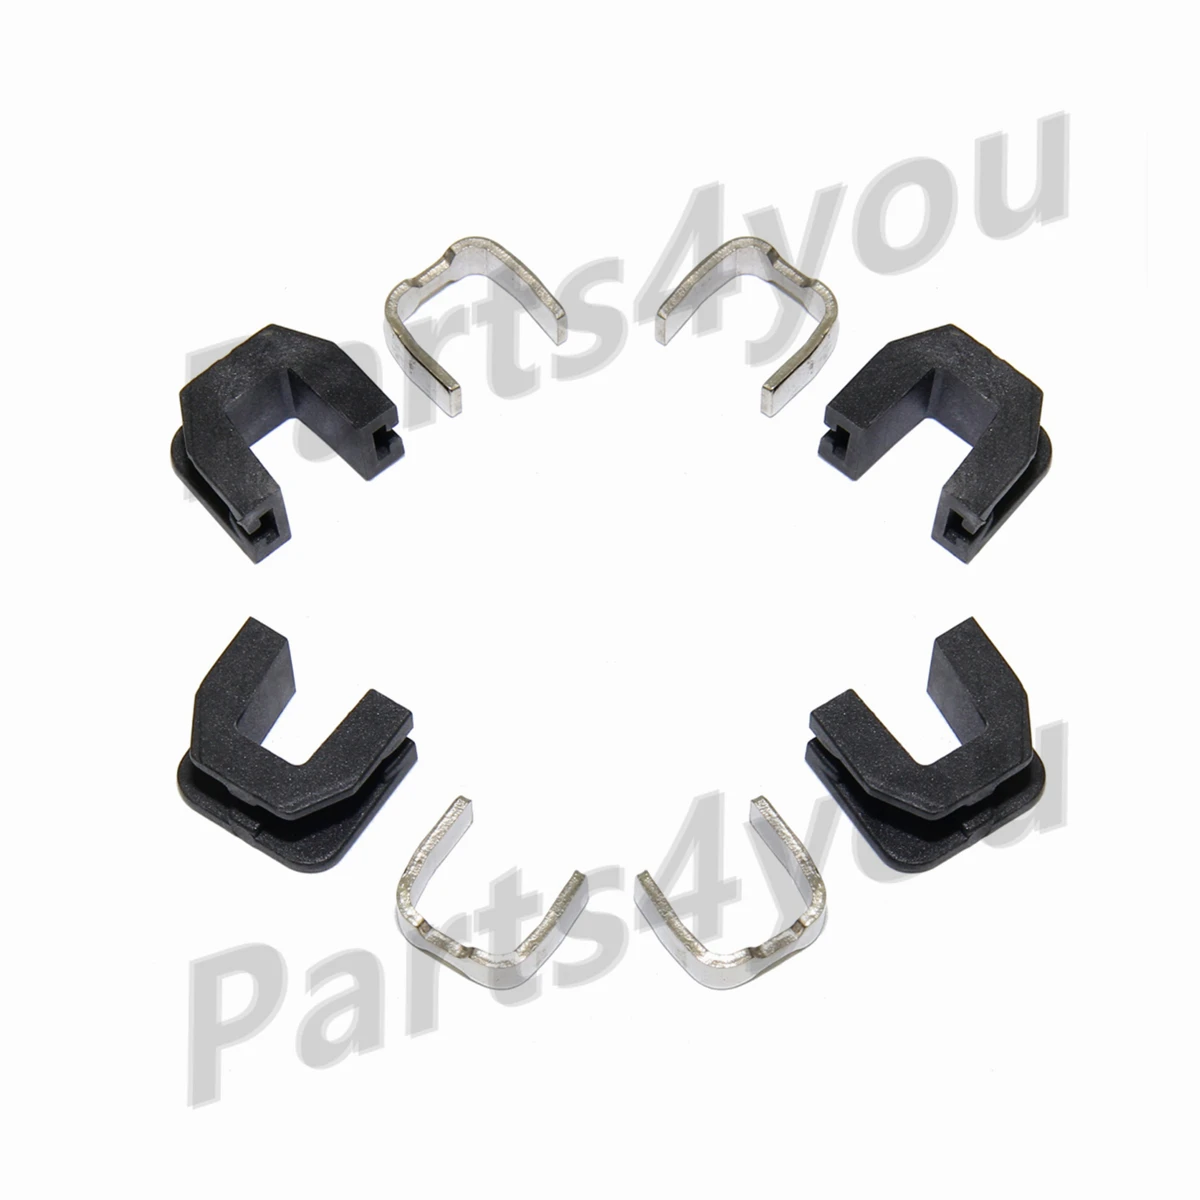 4PCS Slider with Spacer Kit for Linhai 260 300 E2 400 E2 400 2B IRS LH260 LH300 LH400 Majester 250 YP250 23807 23811